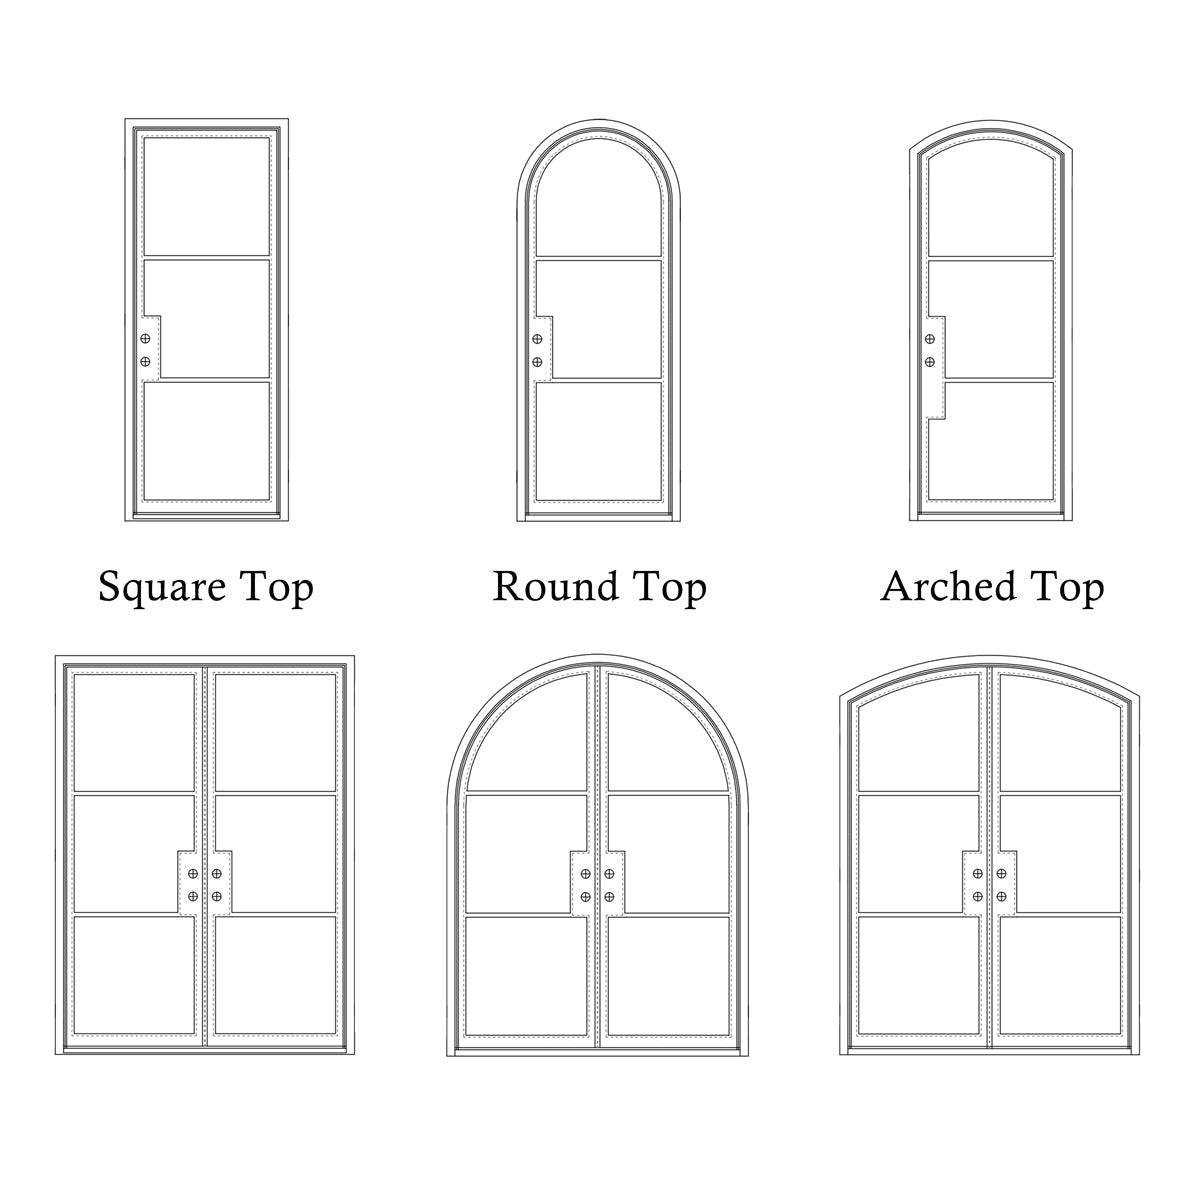 GID Iron Double French Exterior Door With Square Top Neat Design FD023